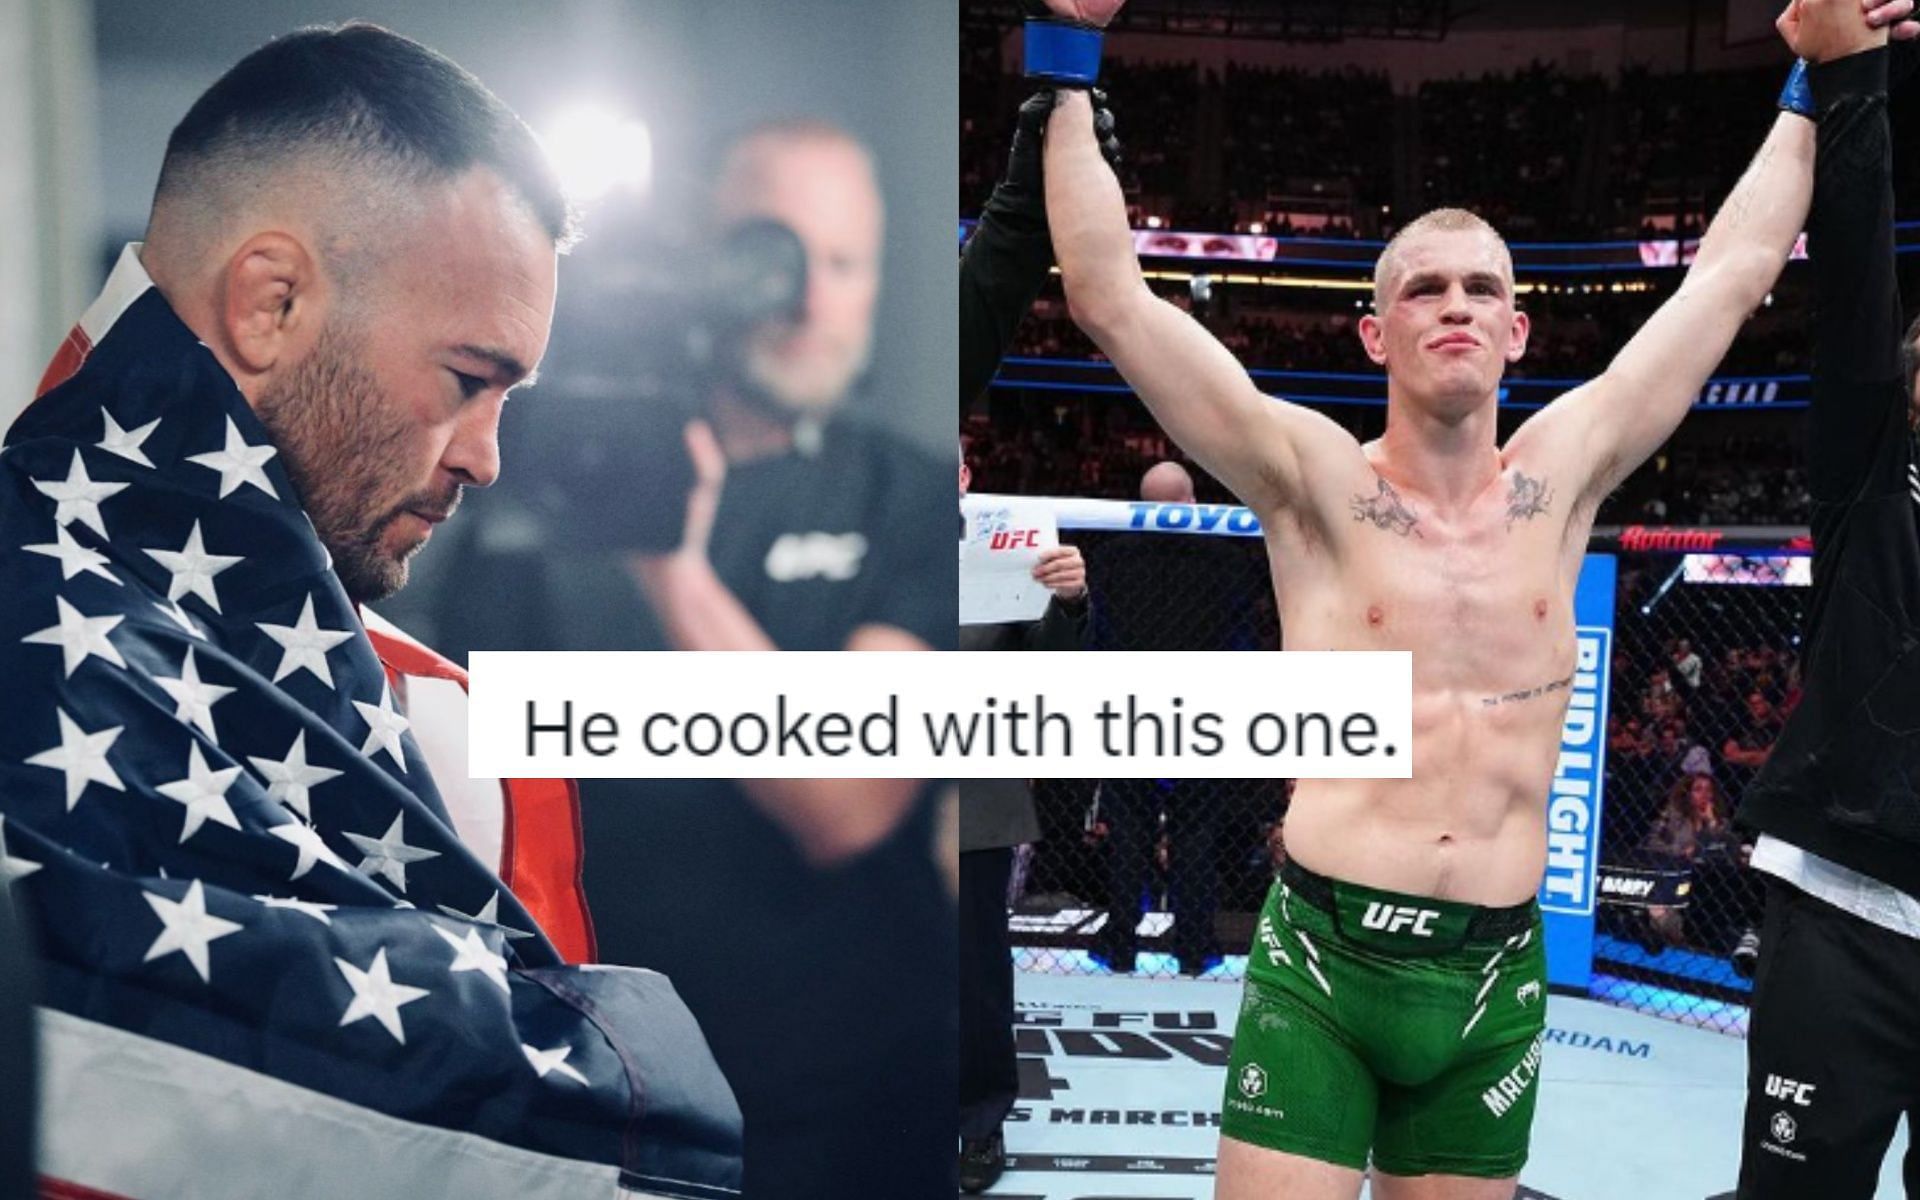 Colby Covington (L) and Ian Garry (R) have continued their war of words. [Images via @colbycovington and @iangarry on Instagram]